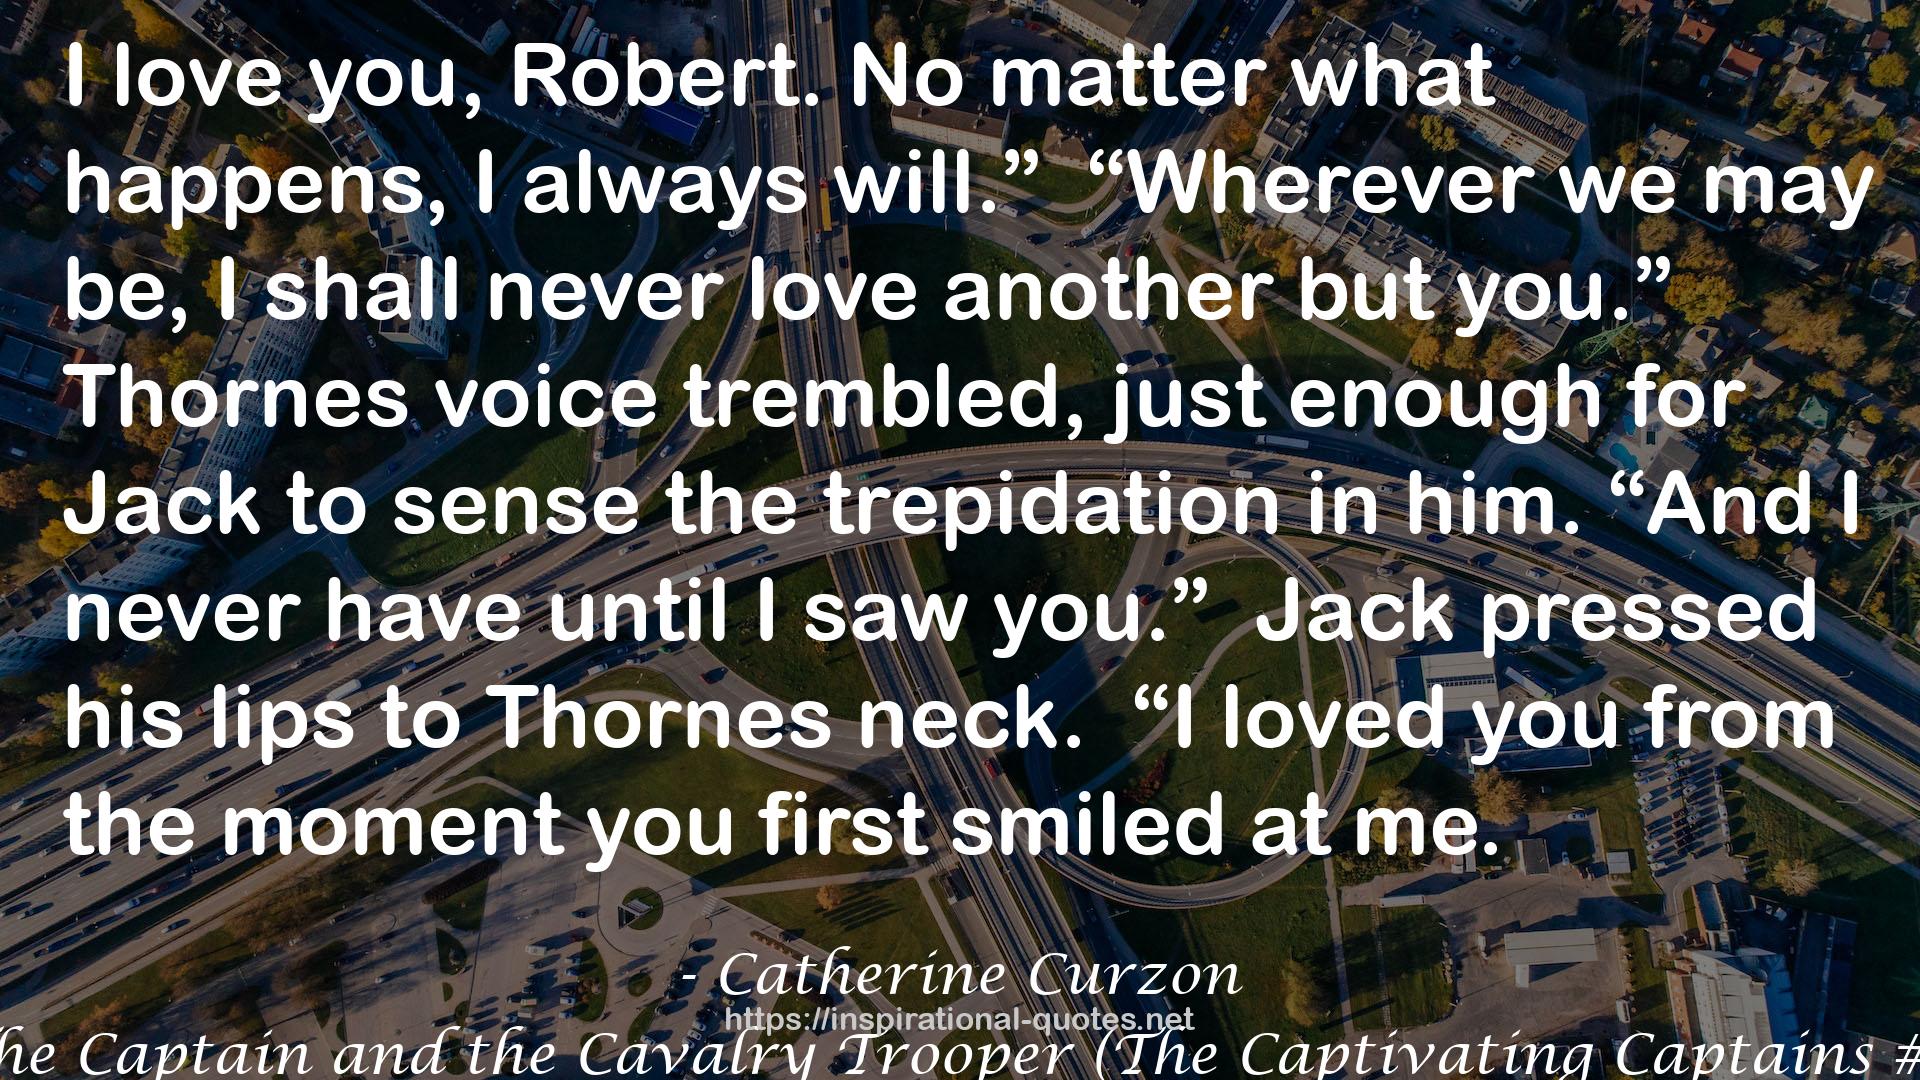 The Captain and the Cavalry Trooper (The Captivating Captains #1) QUOTES